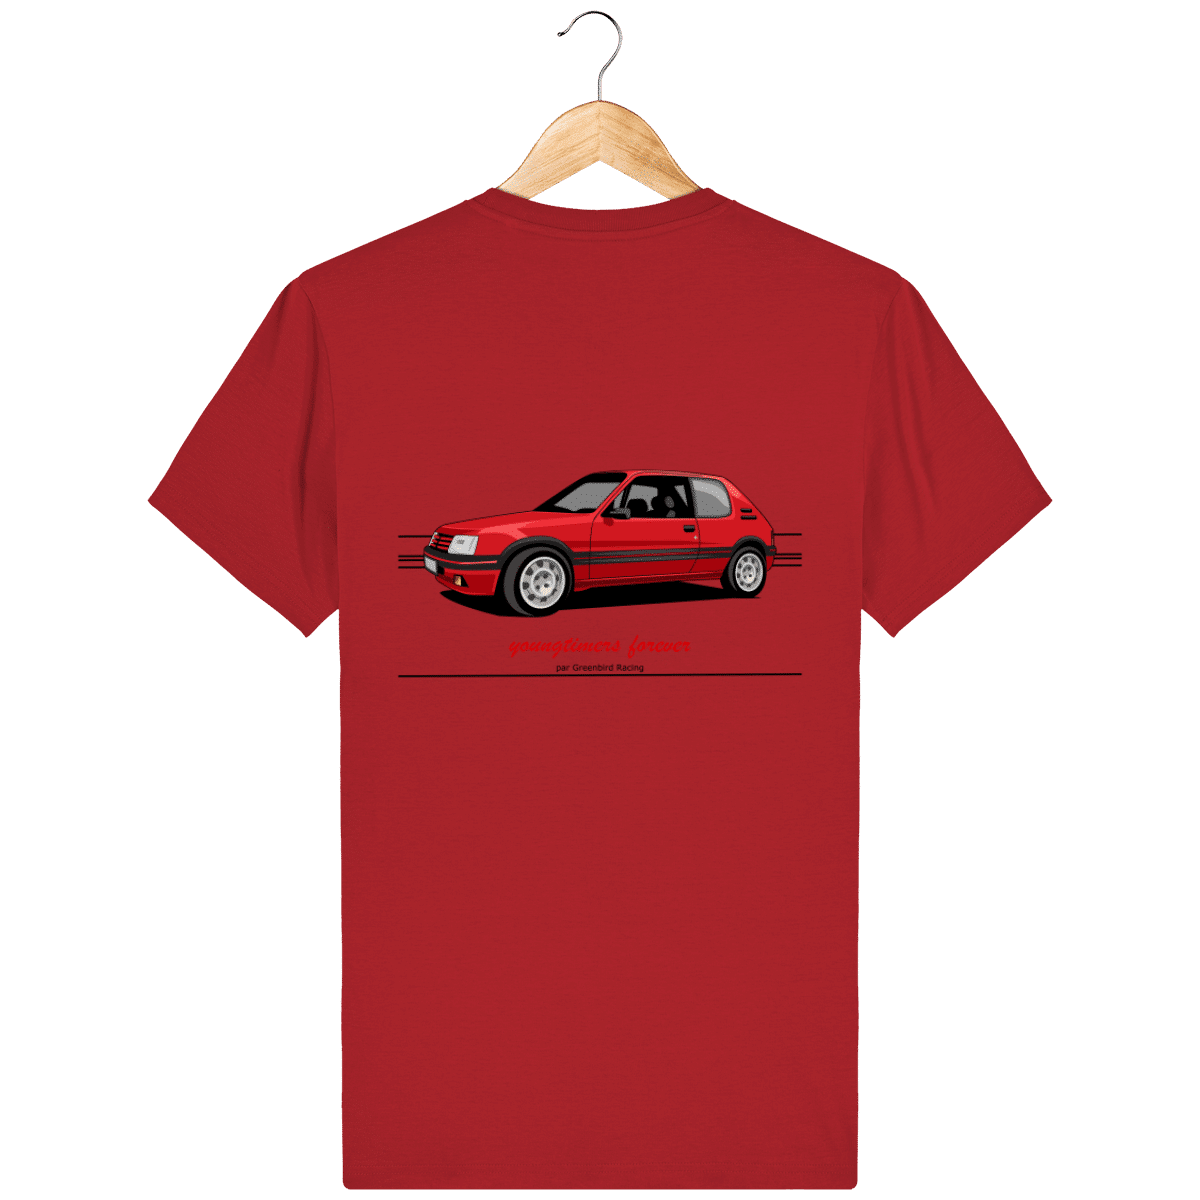 T-Shirt 205 GTI red Vallelunga printed back + front - Greenbird-racing